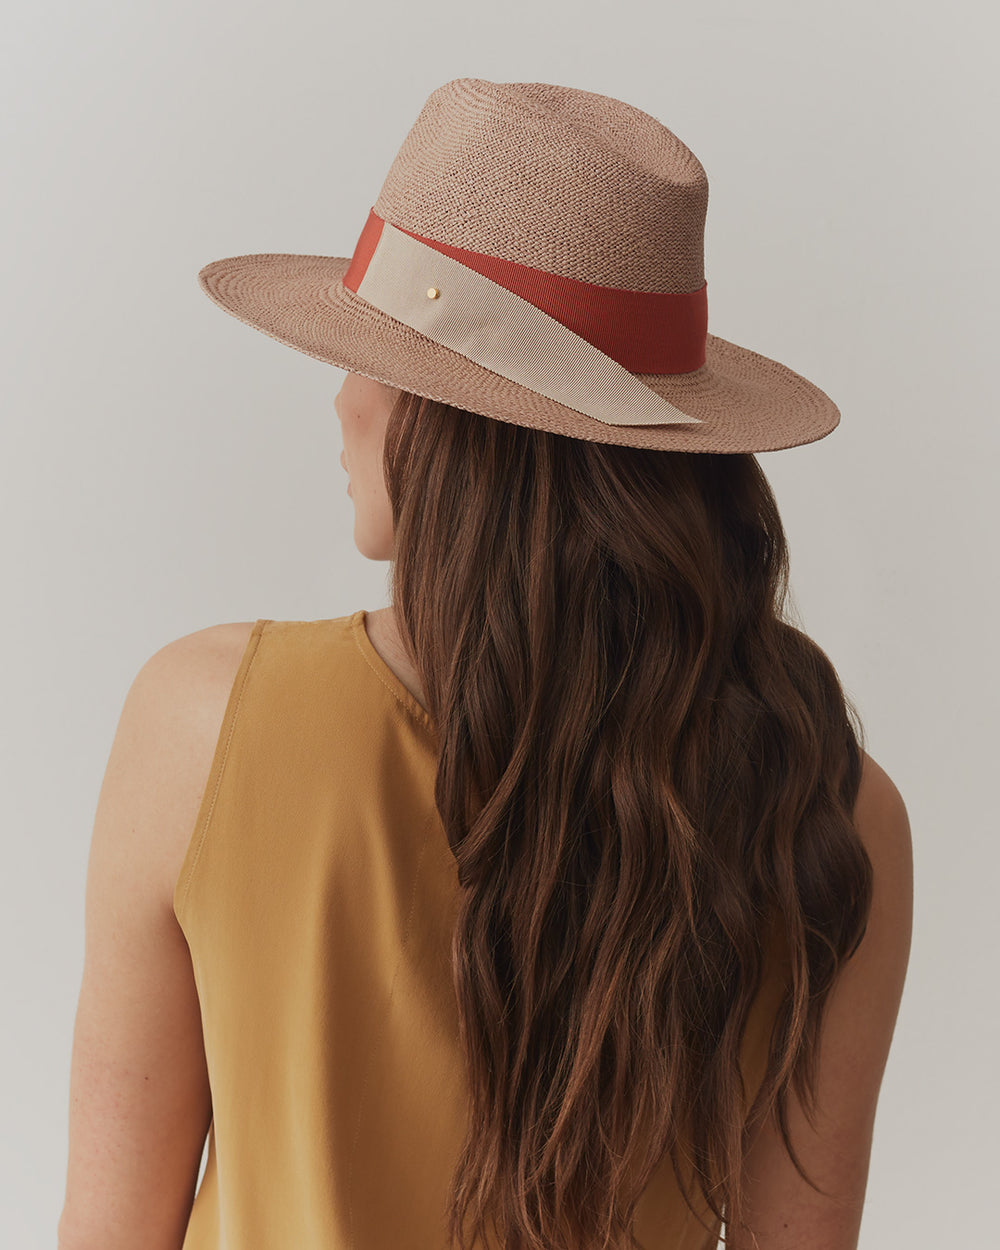 Woman with wavy hair wearing a hat, viewed from behind.